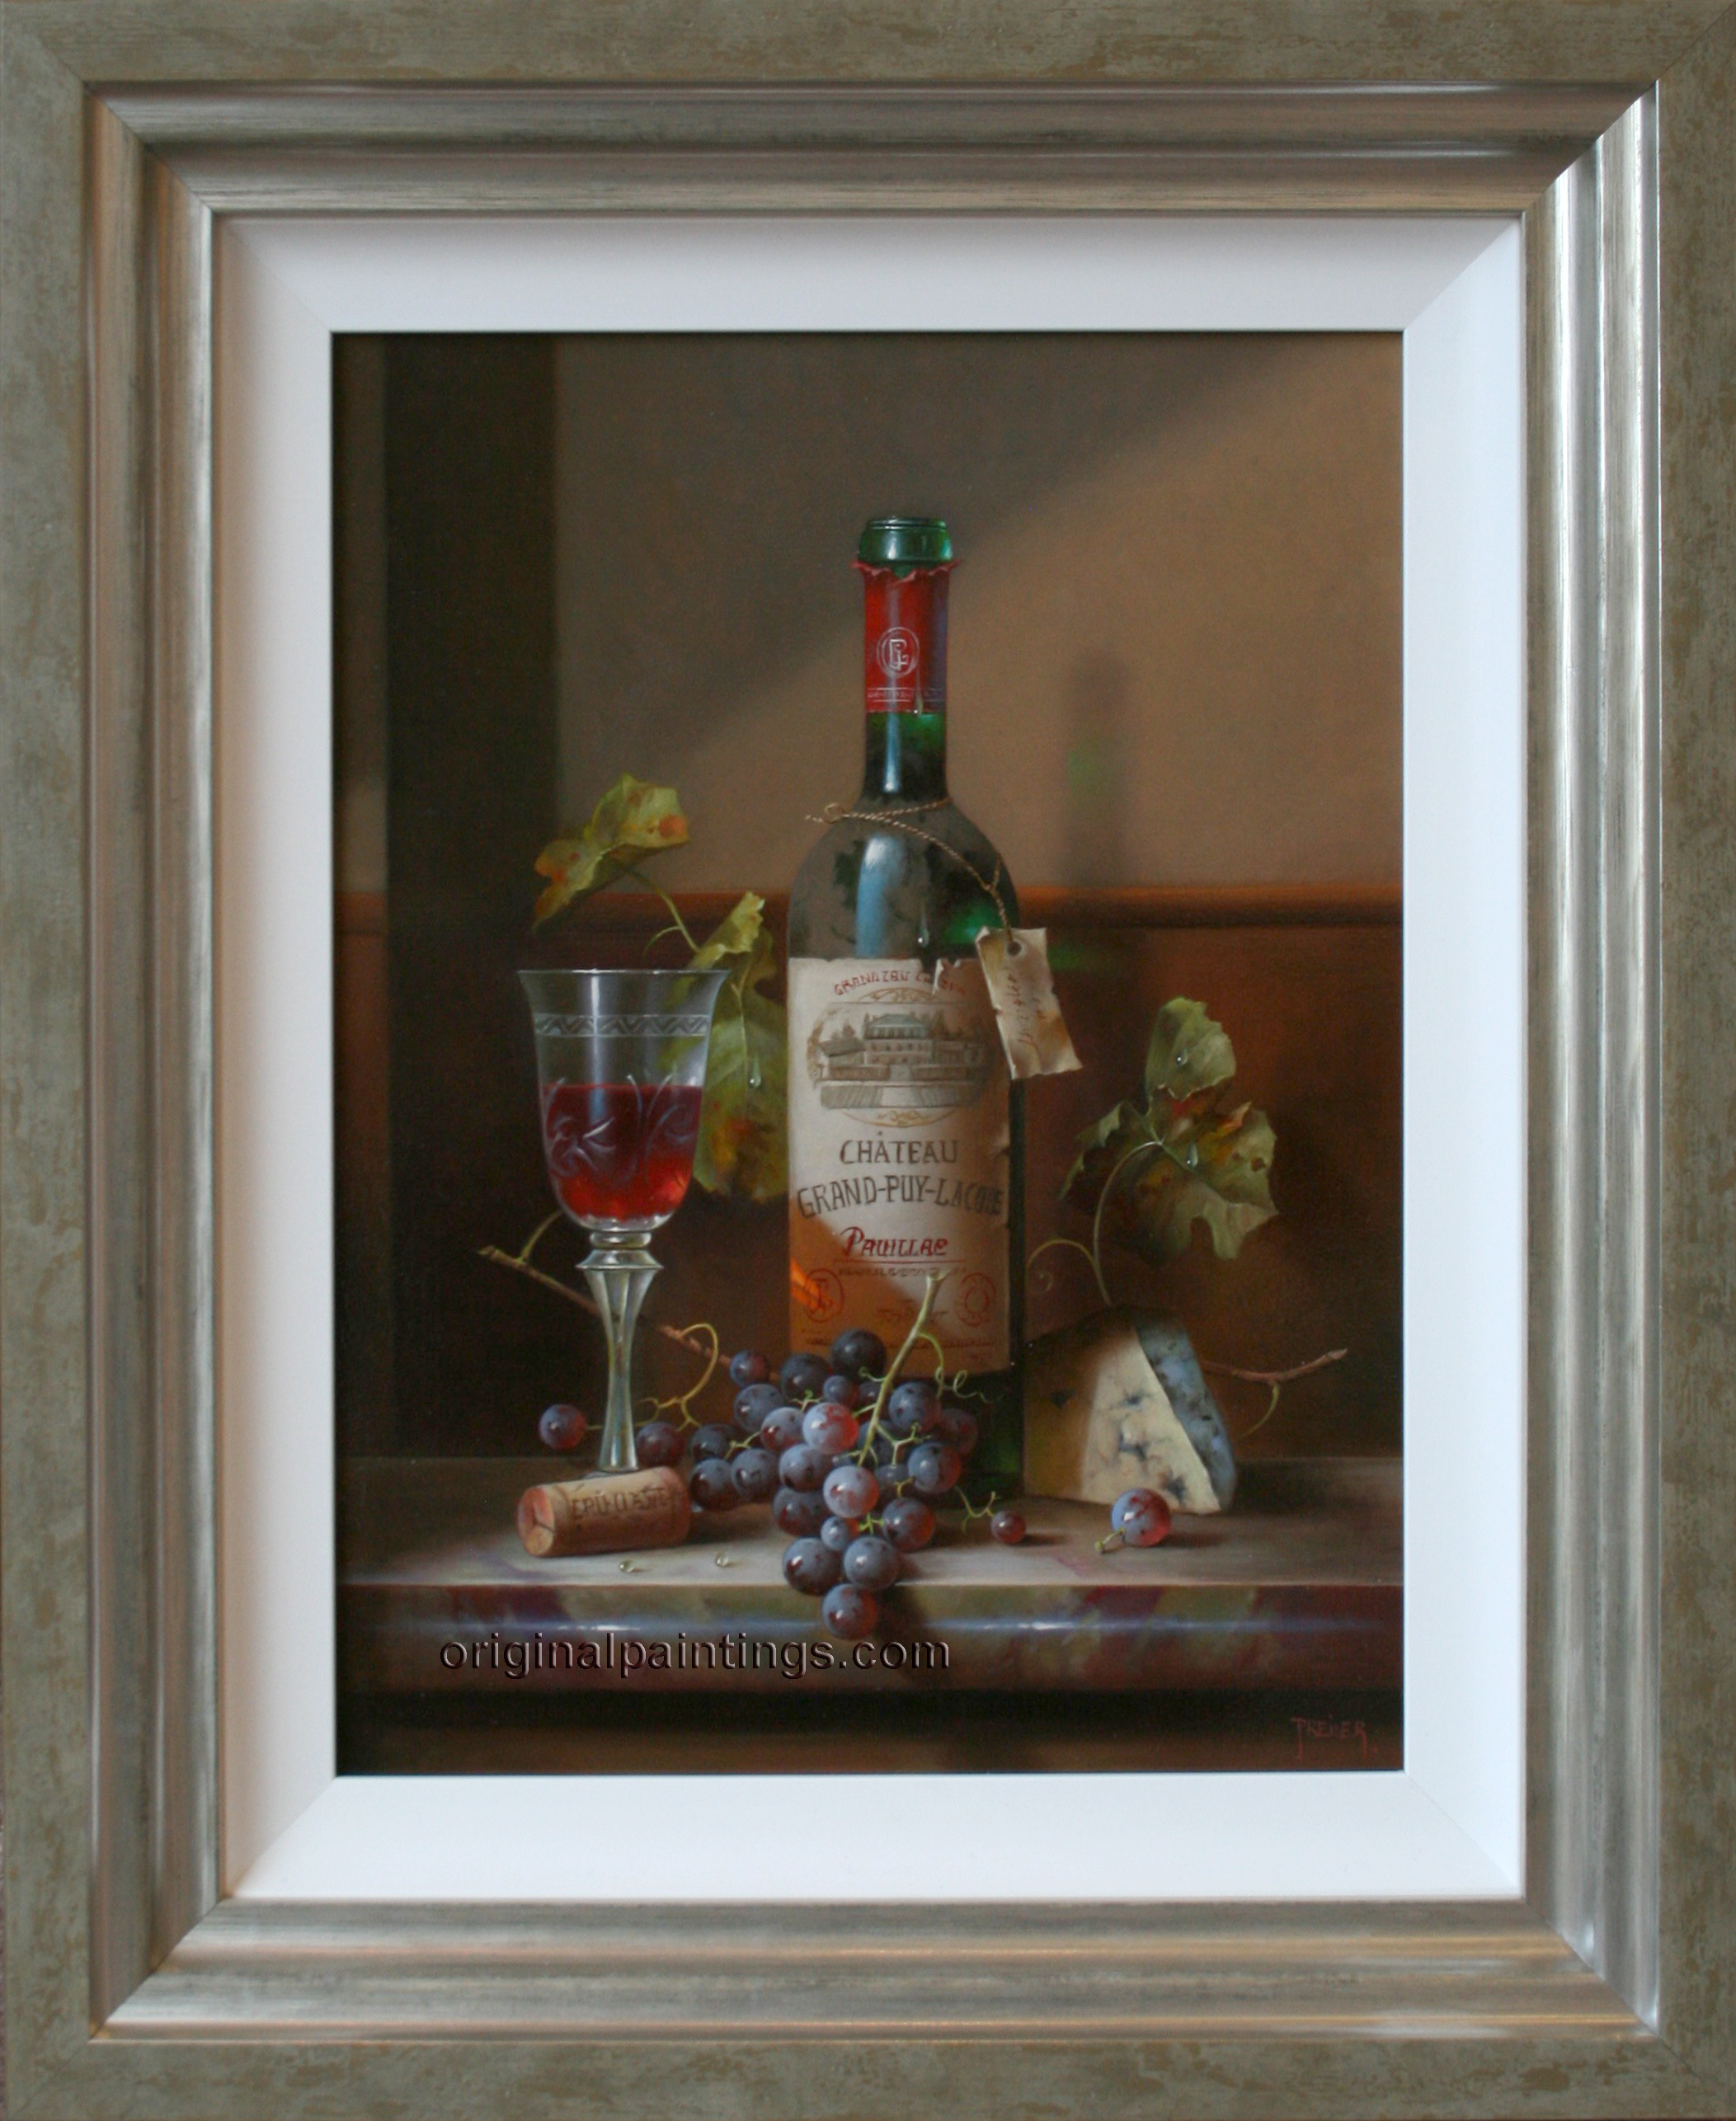 Zoltan Preiner, Original Oil Painting, Still Life with Chateau Grand Puy Lacoste